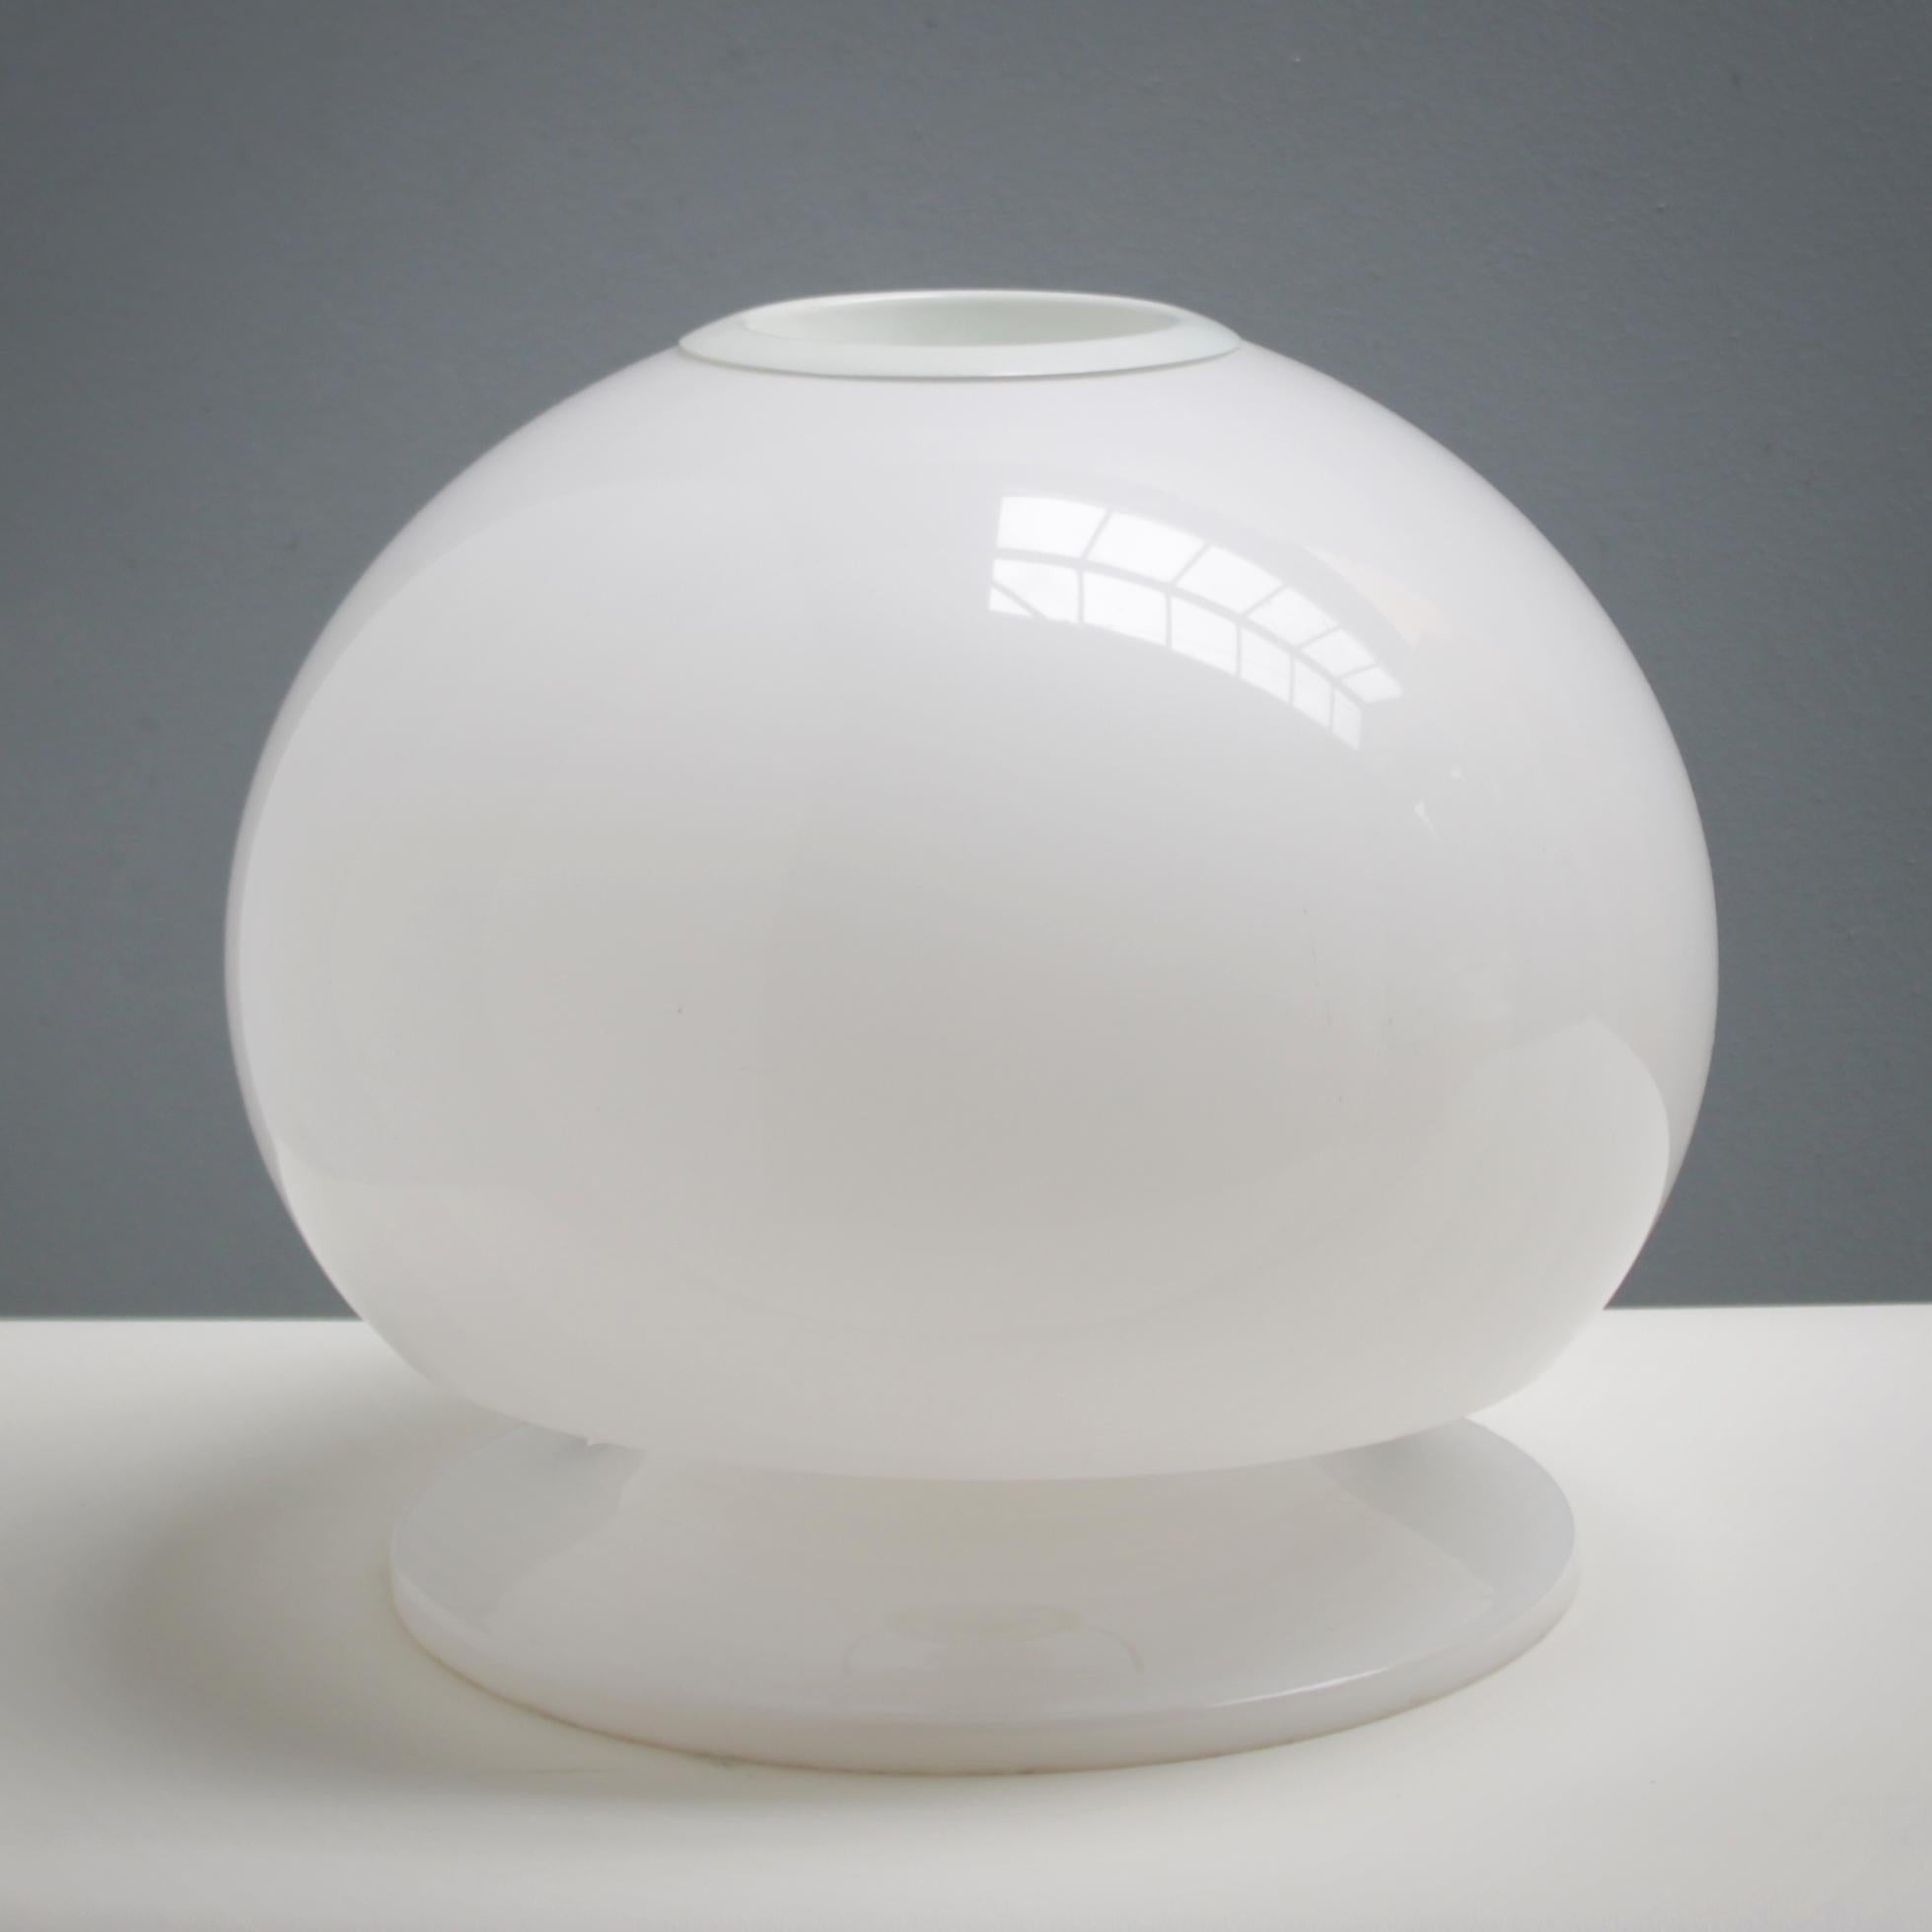 Modernist table lamp in white acrylic in the manner of Gino Sarfatti. Late 1950s-early 1960s. One bulb E27/E26 of max 60 watt, the wire is used but in a good condition, approved to European standards. Works in the US.
Dimensions: height 14.6 in.